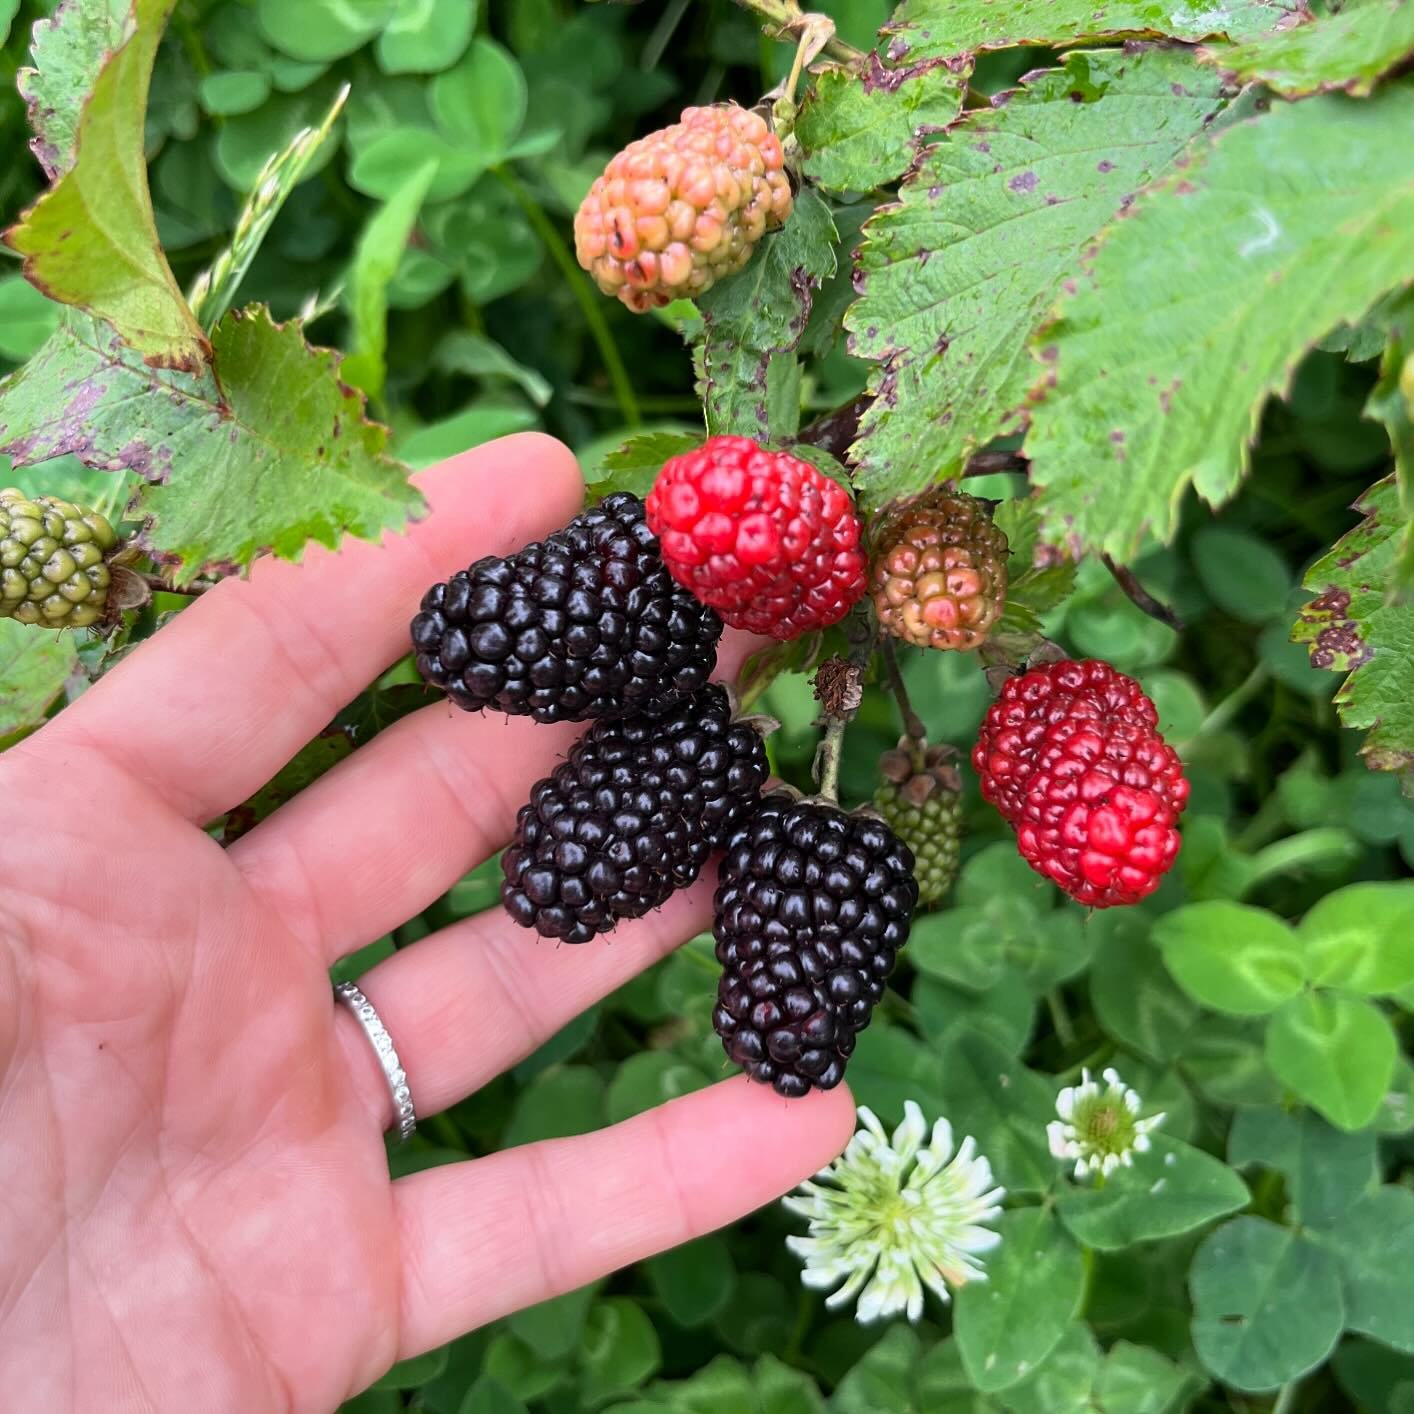 Ladies and germs, IT&rsquo;S TIME! We&rsquo;ll be open Tuesday, May 14 and Thursday, May 16 for blackberry picking. The veggies are still closed - we will ONLY be picking blackberries this week. Spots will open up for booking tomorrow (Sunday) mornin